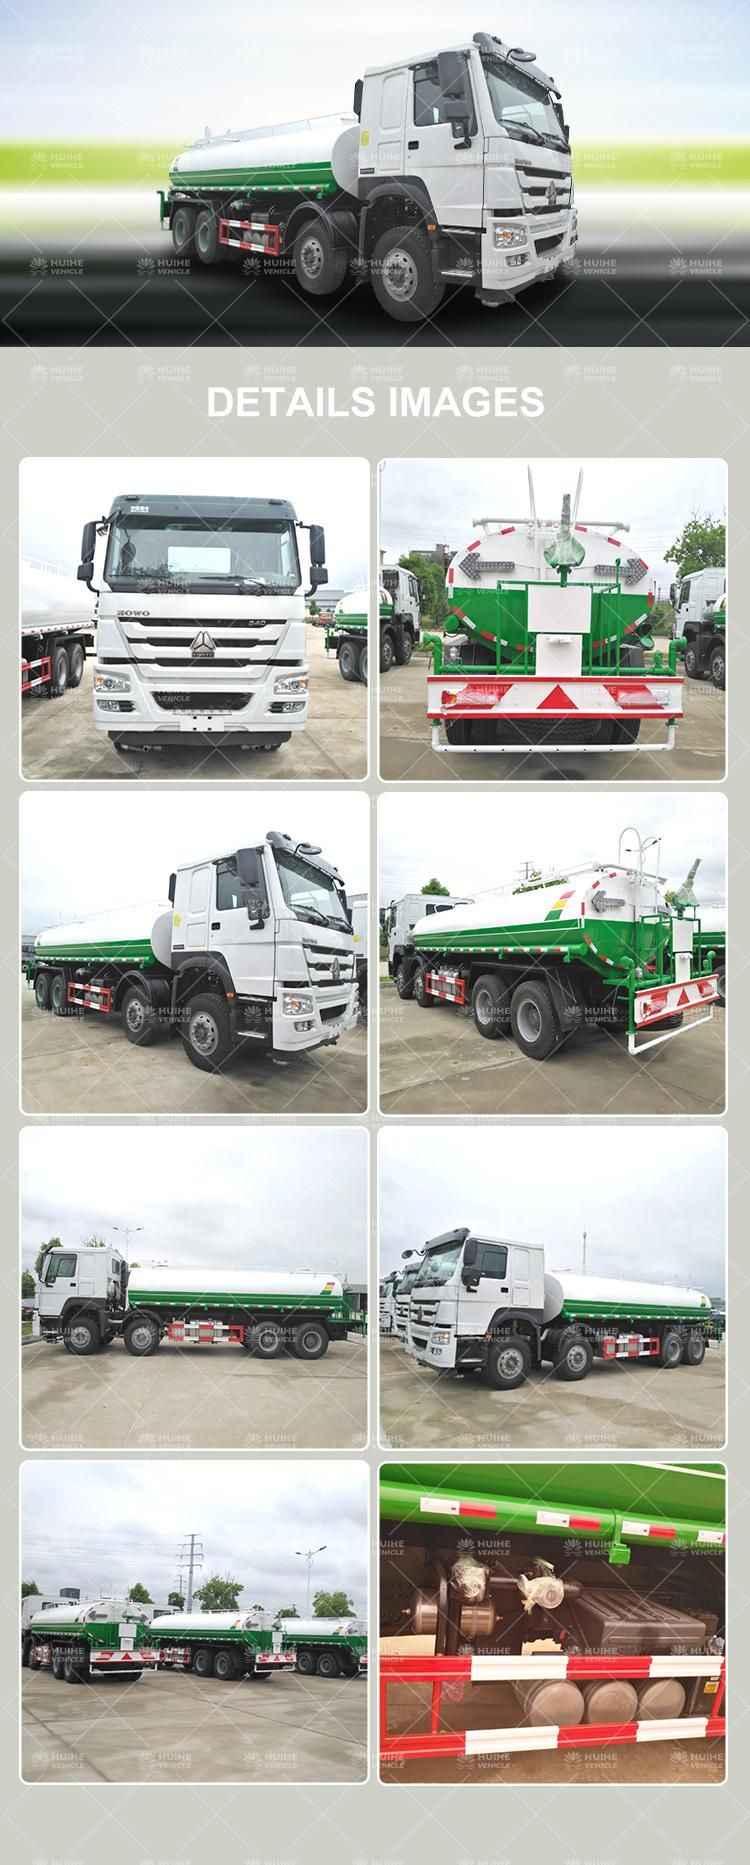 Hino-Truck Water Tanker Cheap Used Water Truck Used Heavy Duty Water Trucks Fro Sales